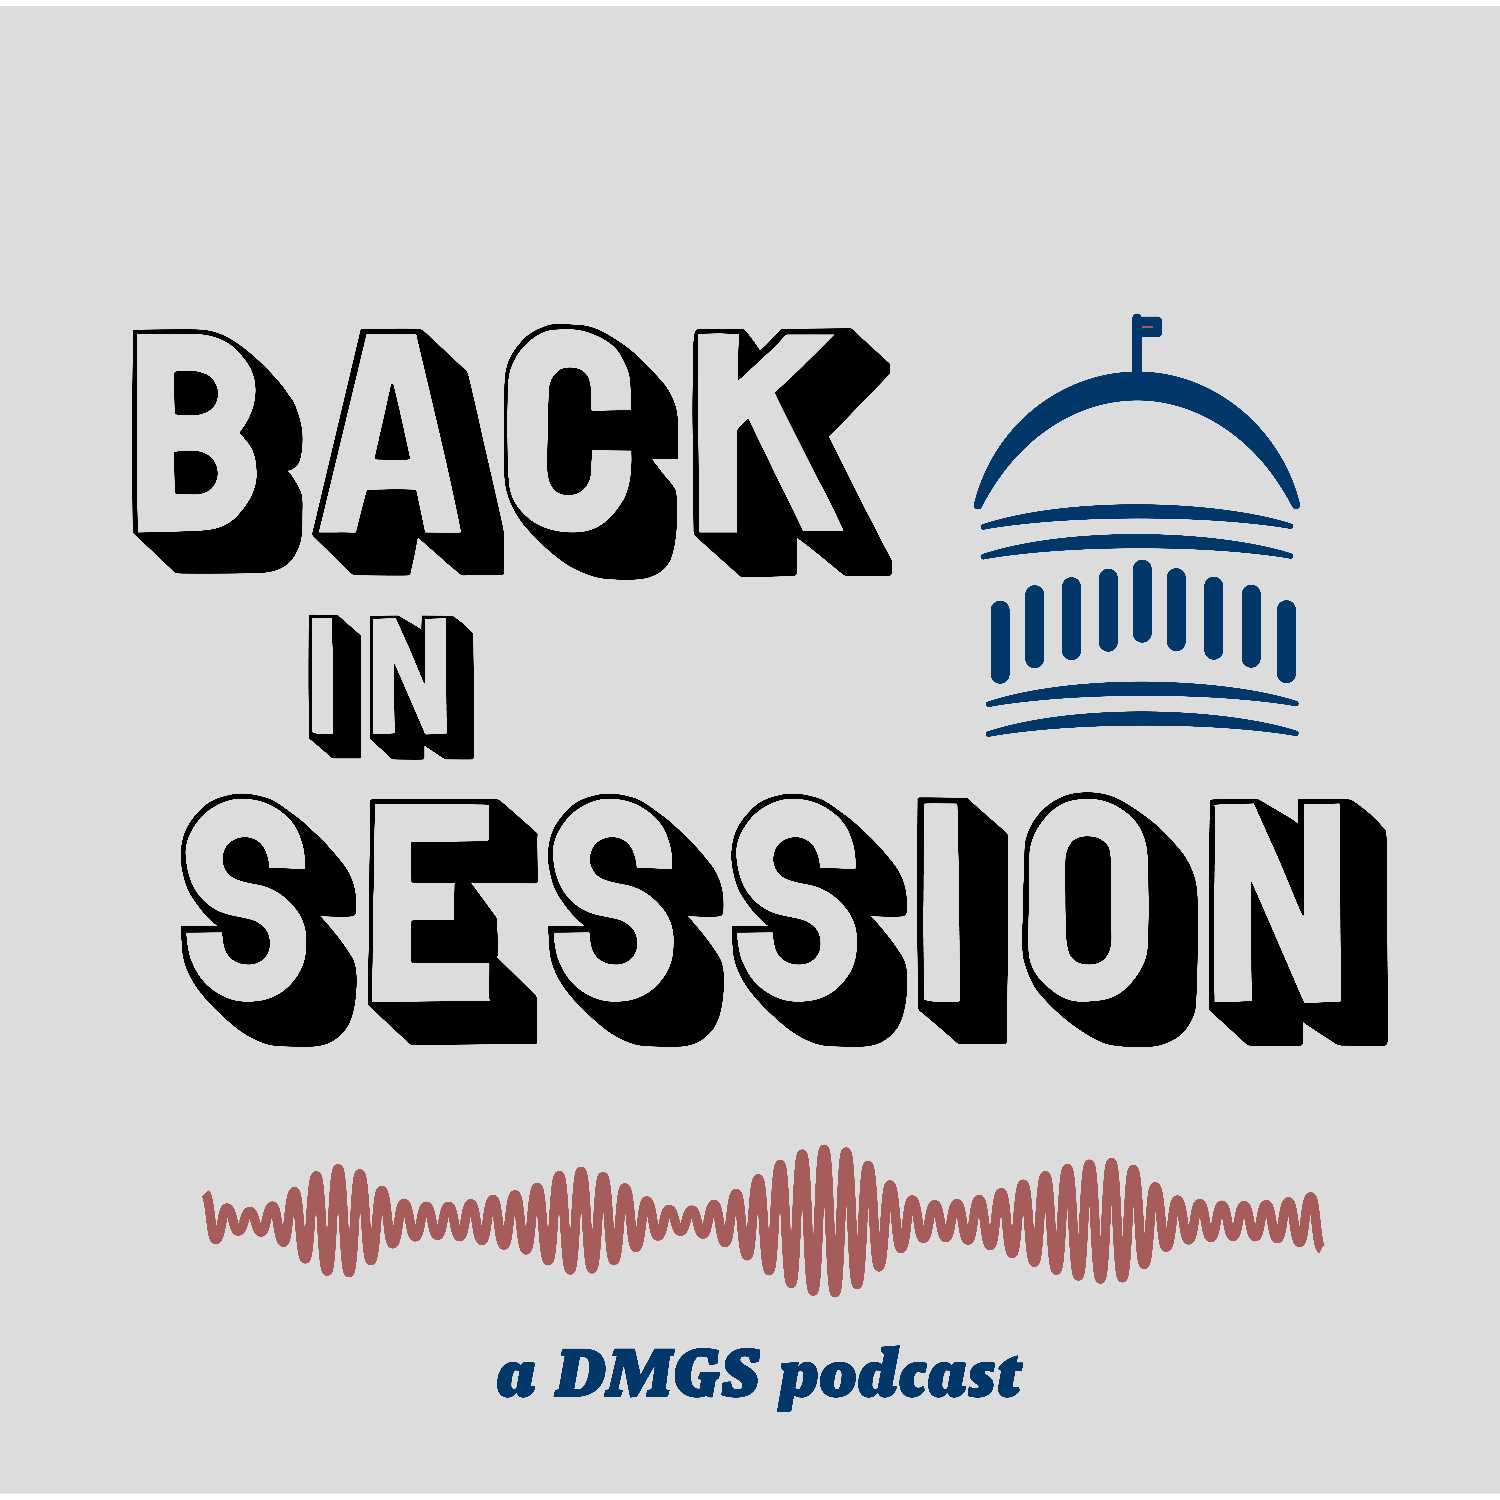 Back in Session Episode 2: Featuring DMGS Ohio Director Katie DeLand